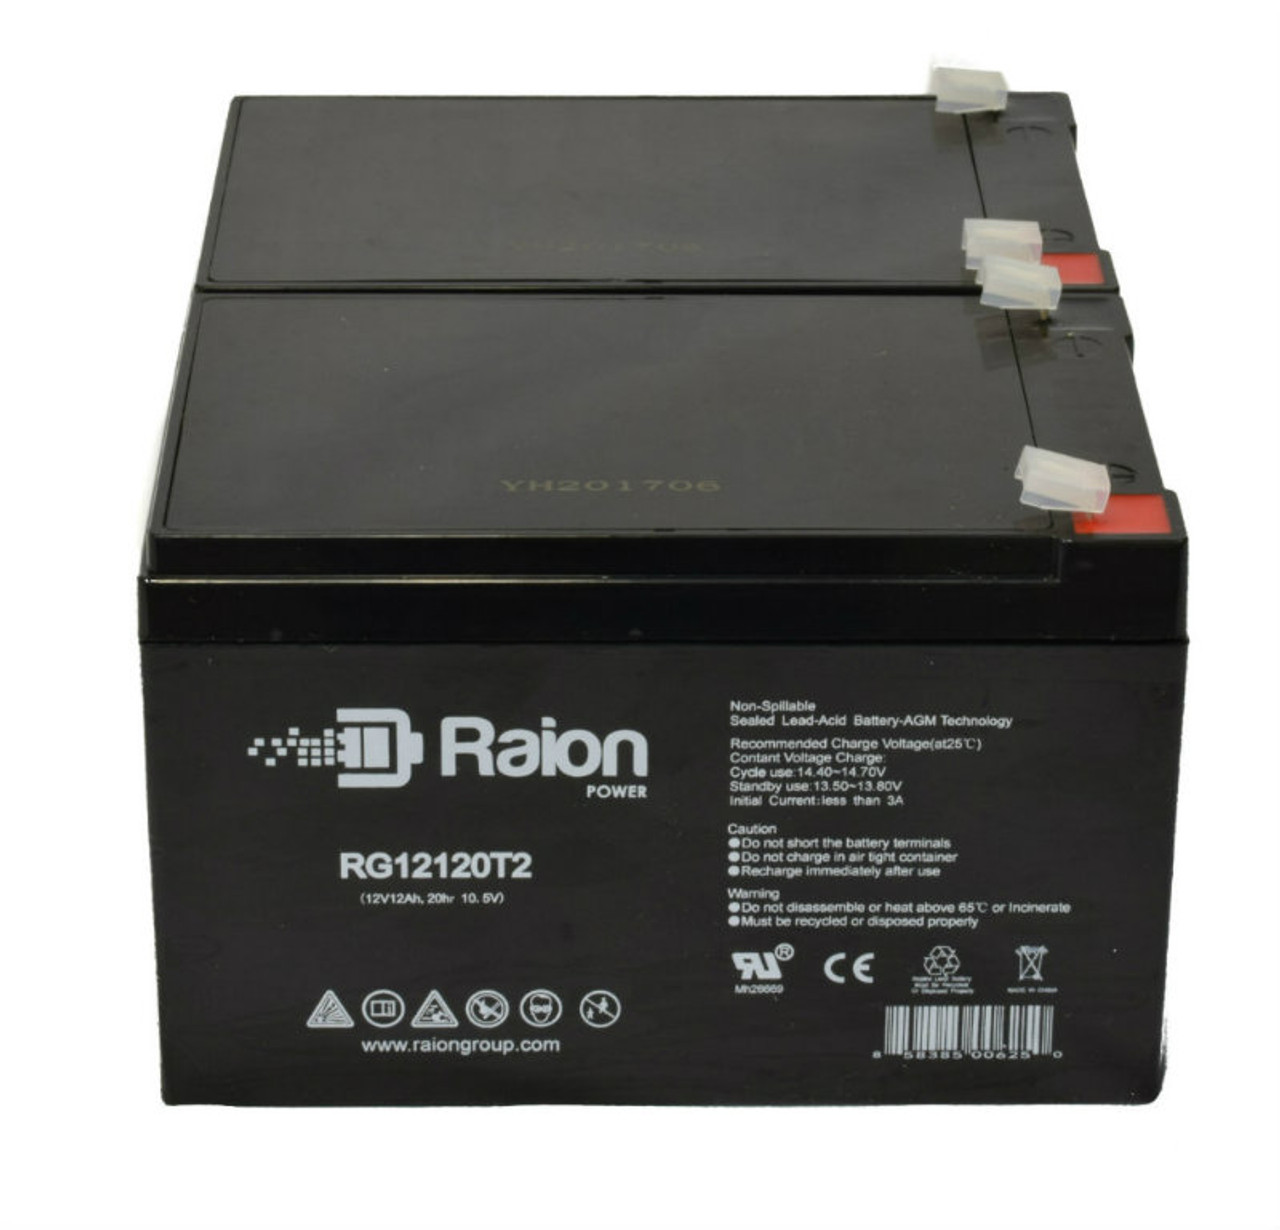 Raion Power 12V 12Ah Non-Spillable Compatible Replacement Battery for Newmox FNC-12120 - (2 Pack)